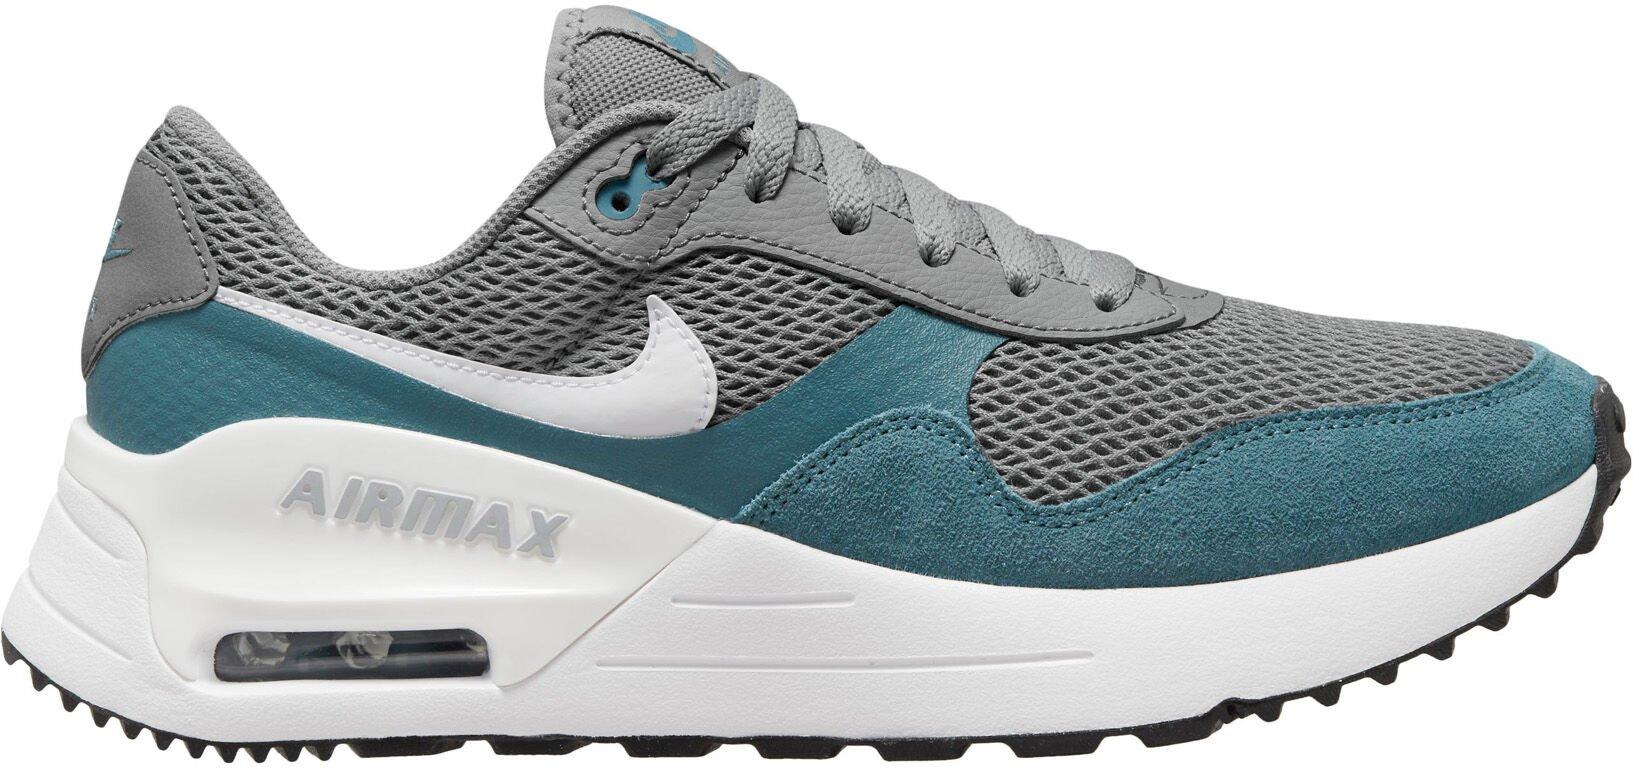 Nike Air Max Systm M Velikost: 44 EUR